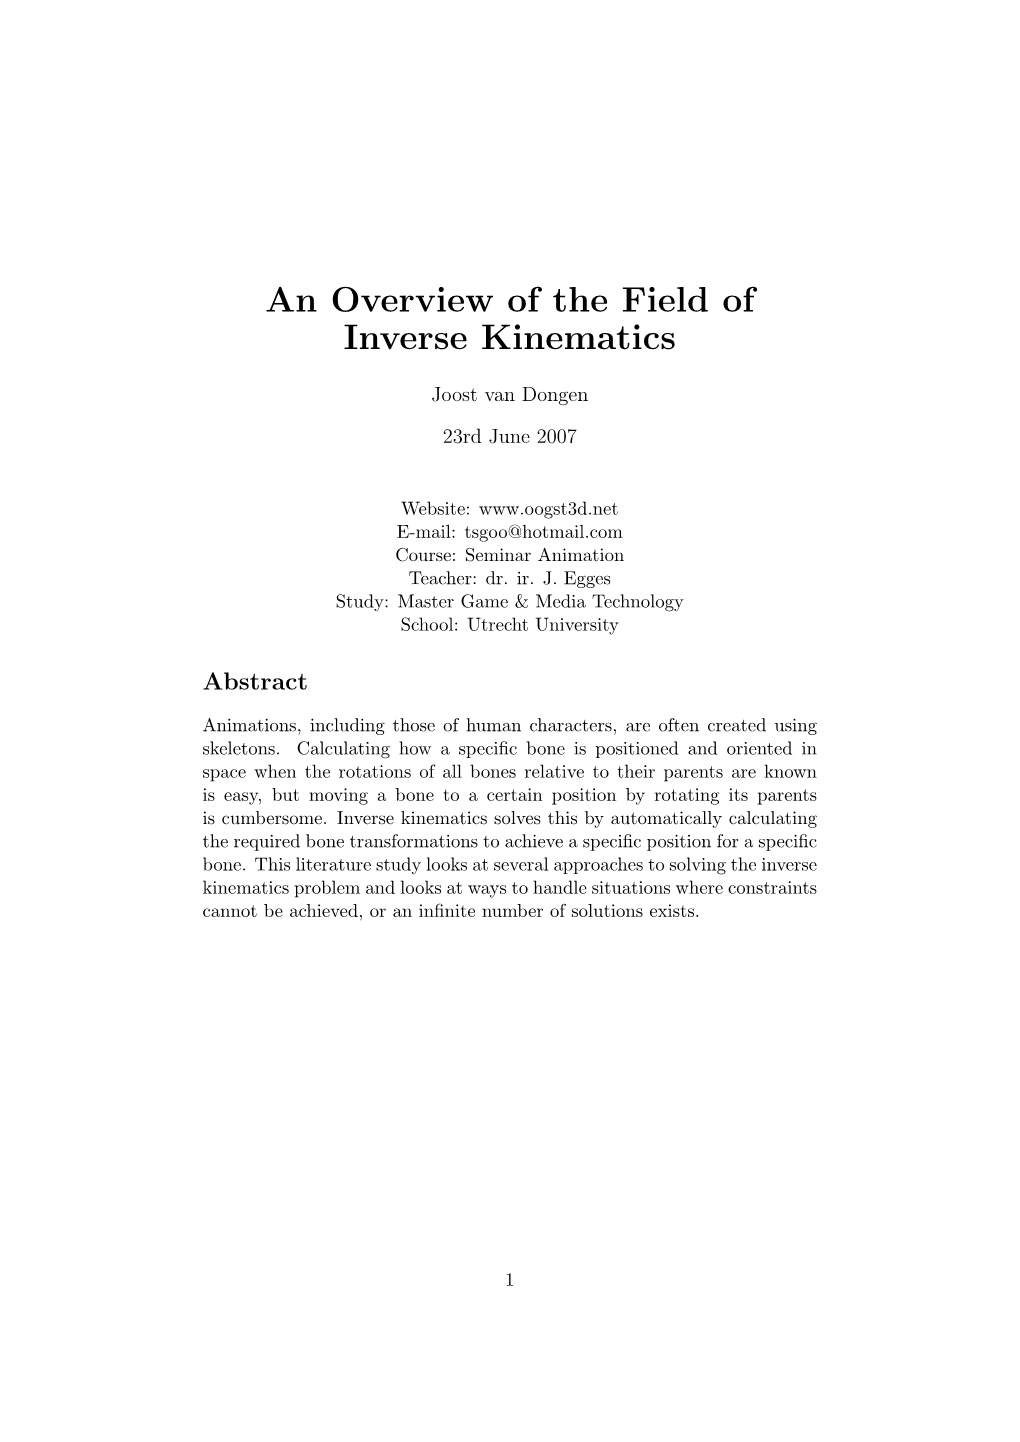 An Overview of the Field of Inverse Kinematics